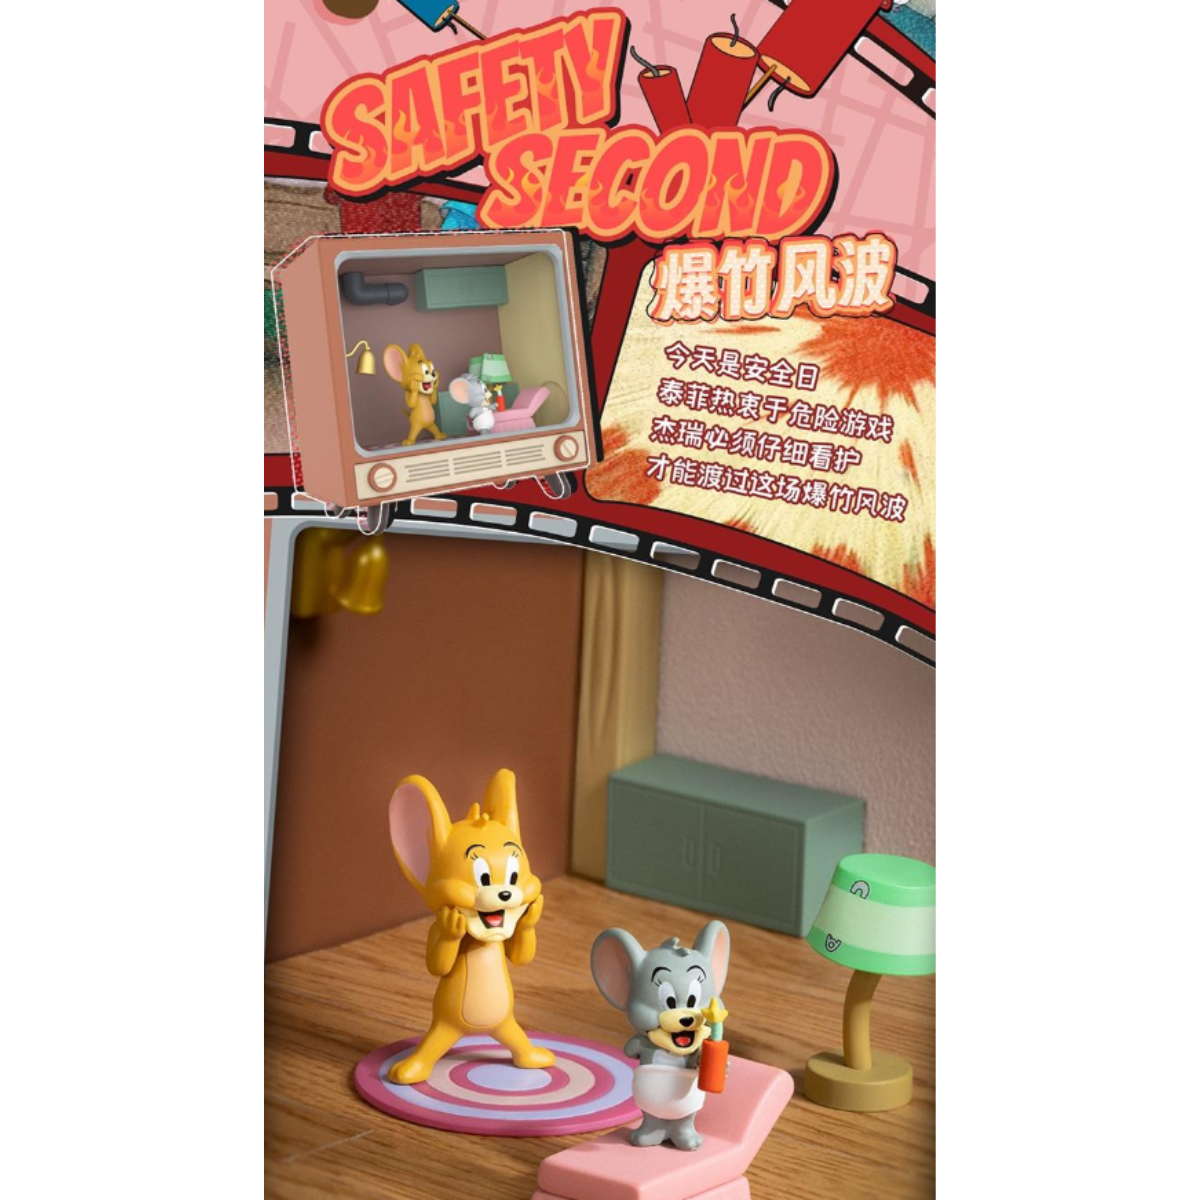 52Toys x Tom And Jerry Classic Moments Series-Single Box (Random)-52Toys-Ace Cards &amp; Collectibles